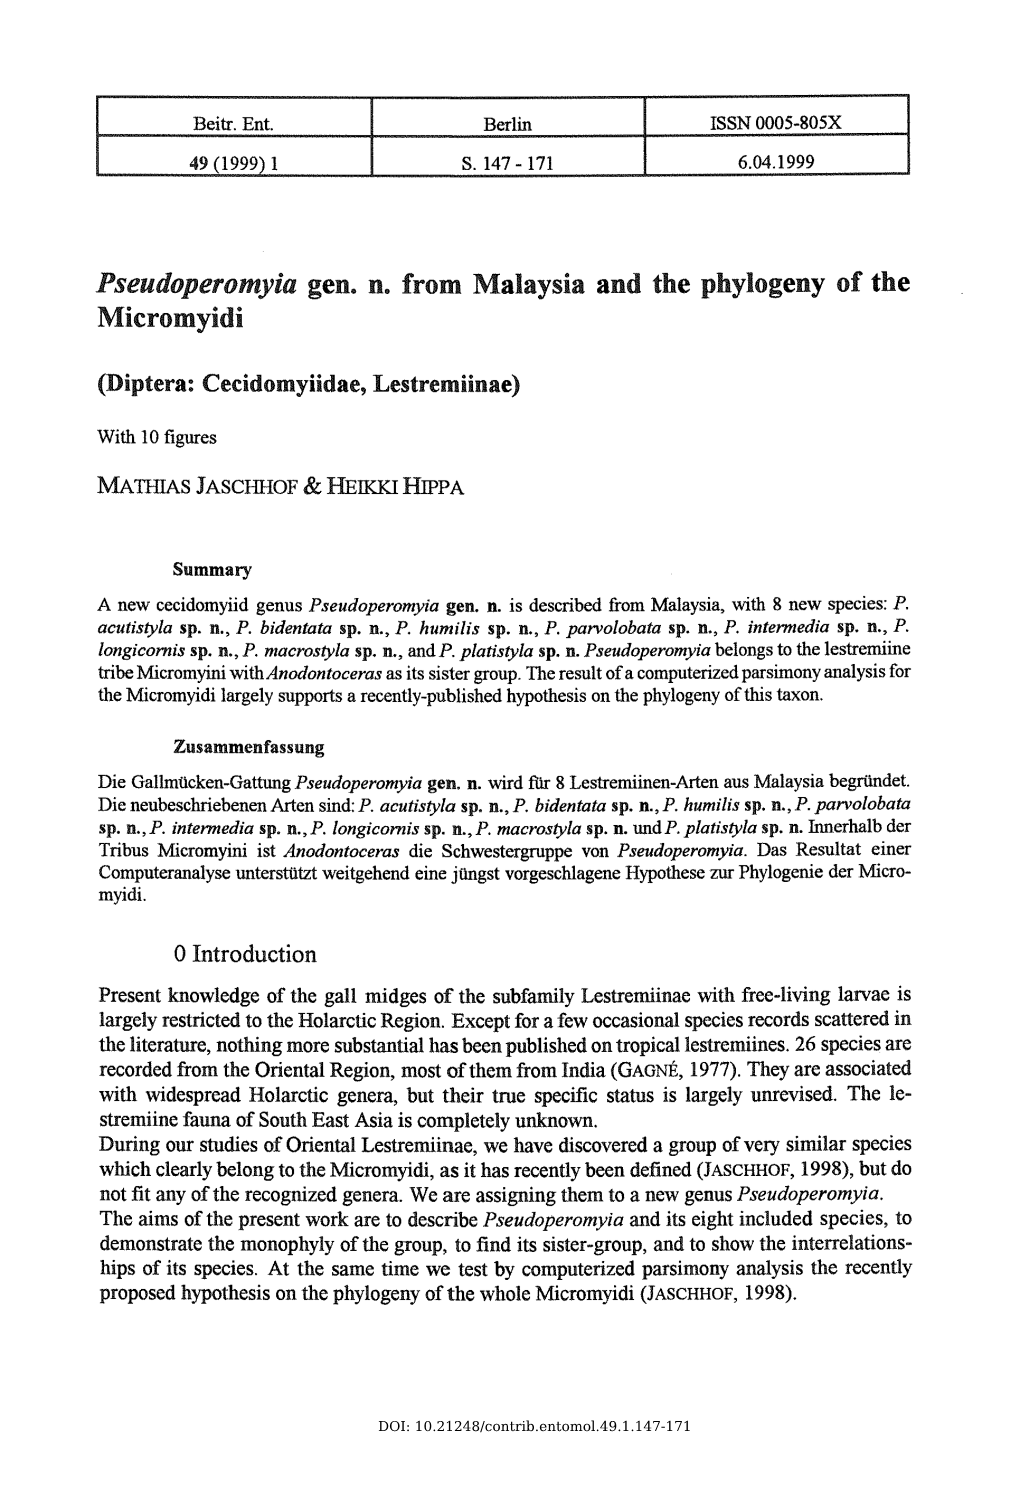 Pseudoperomyia Gen. N. from Malaysia and the Phytogeny of the Micromyidi